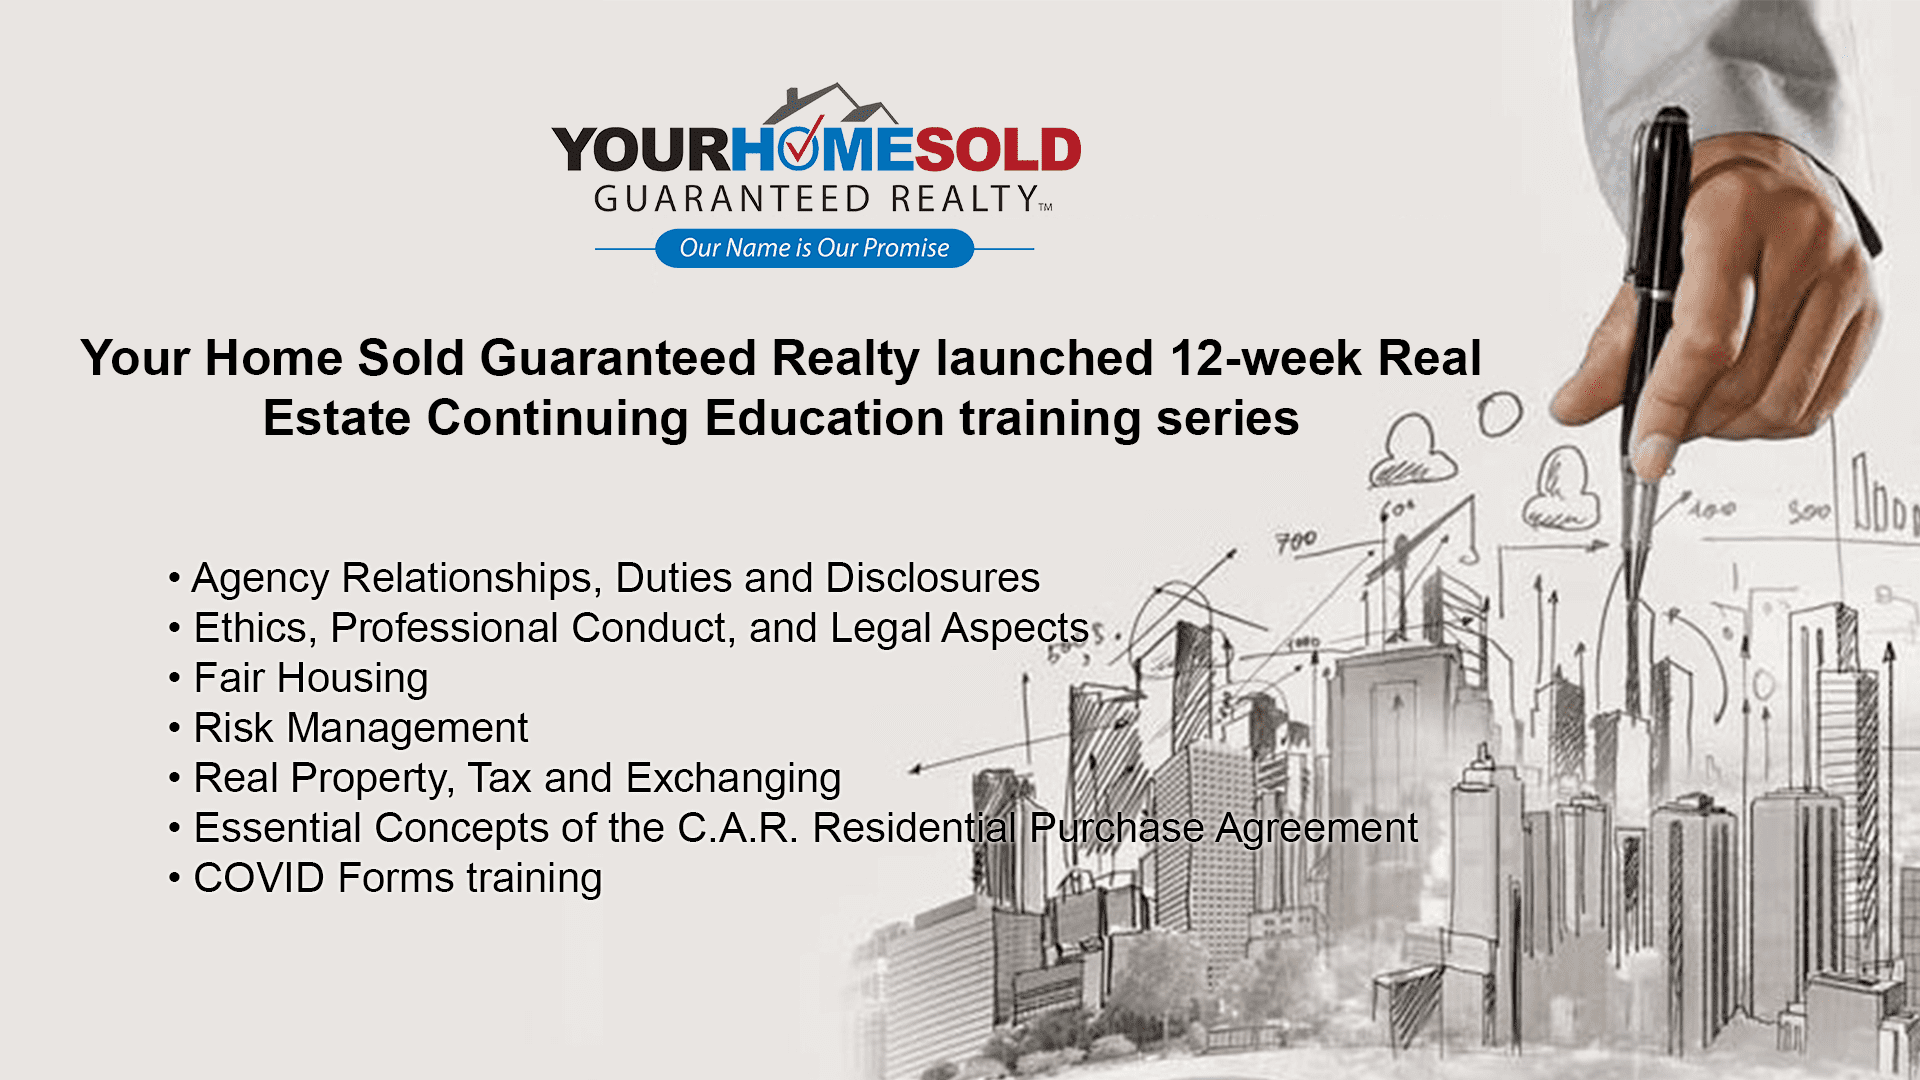 Your-Home-Sold-Guaranteed-Realty-launched-12-week-Real-Estate-Continuing-Education-training-series-.png